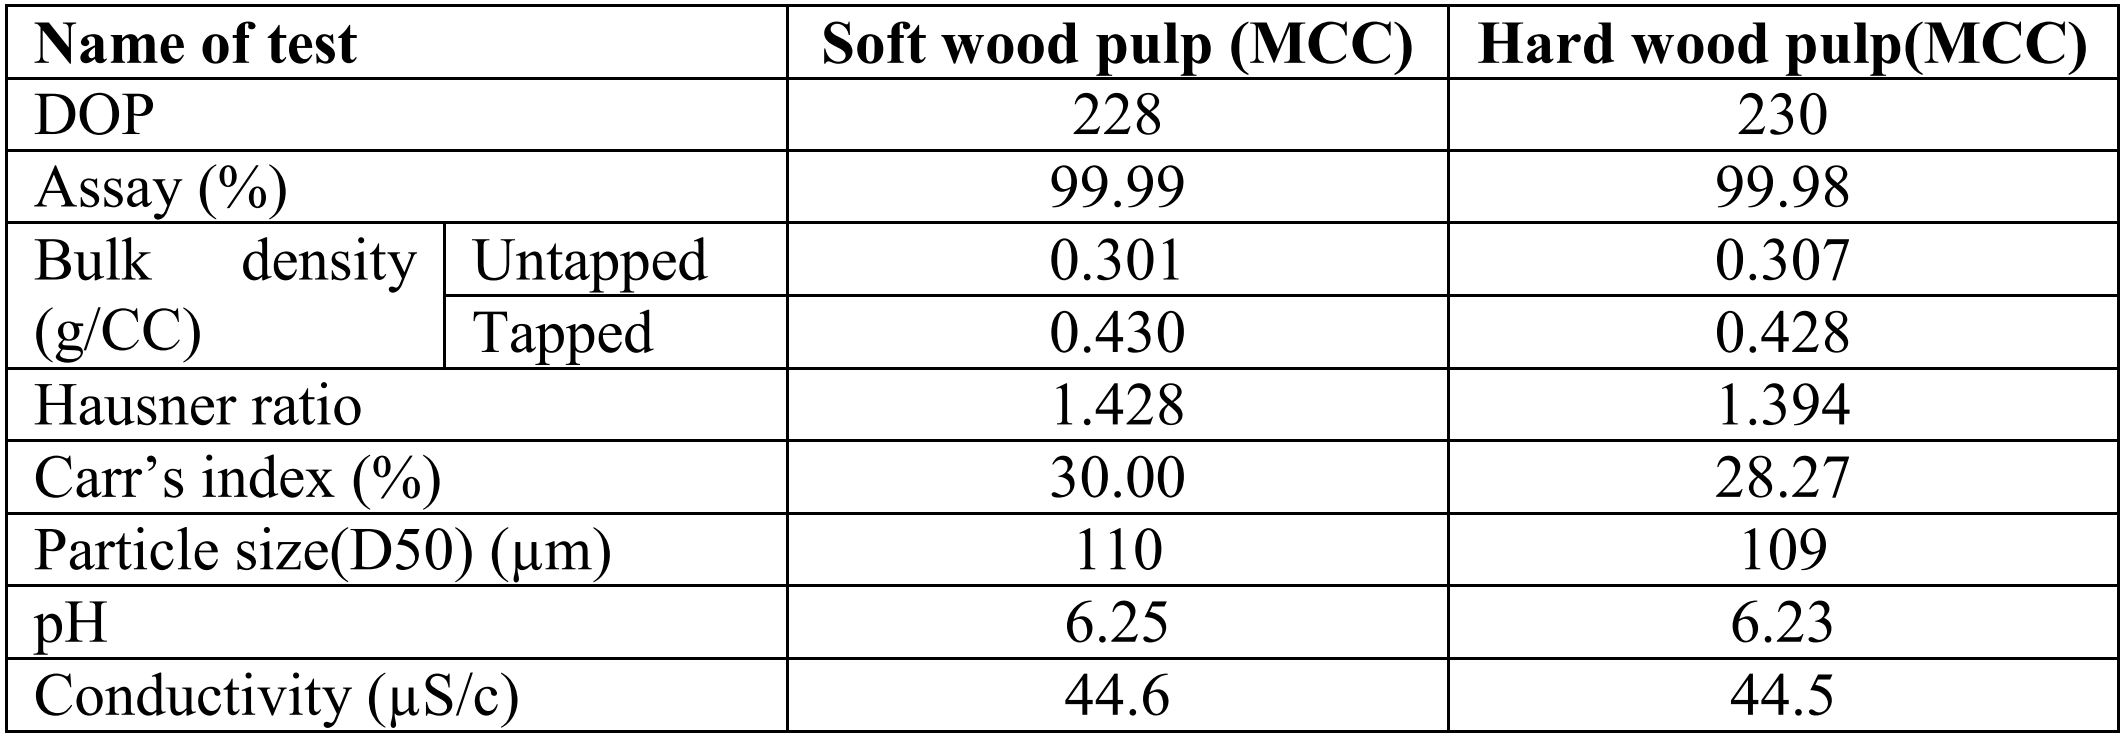 sulfate chemical wood pulp